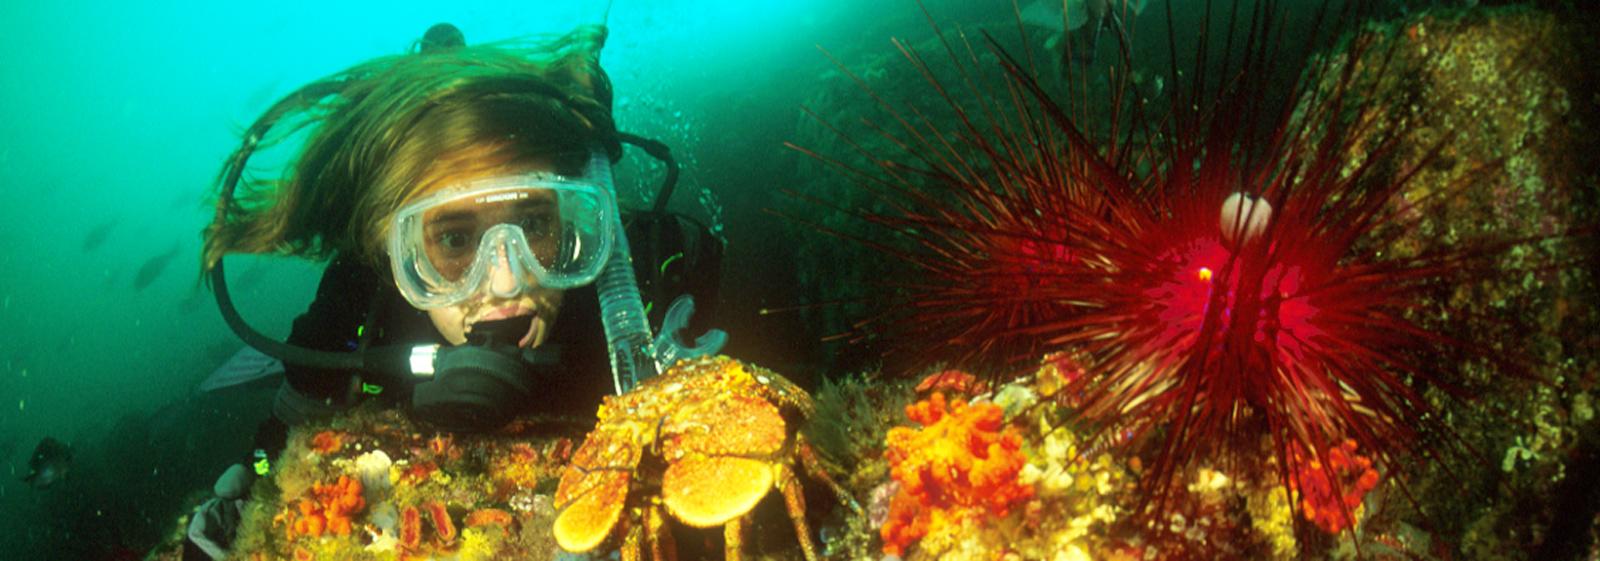 Diver exploring the diverse underwater critters at New Zealand's Poor Knights marine reserve.